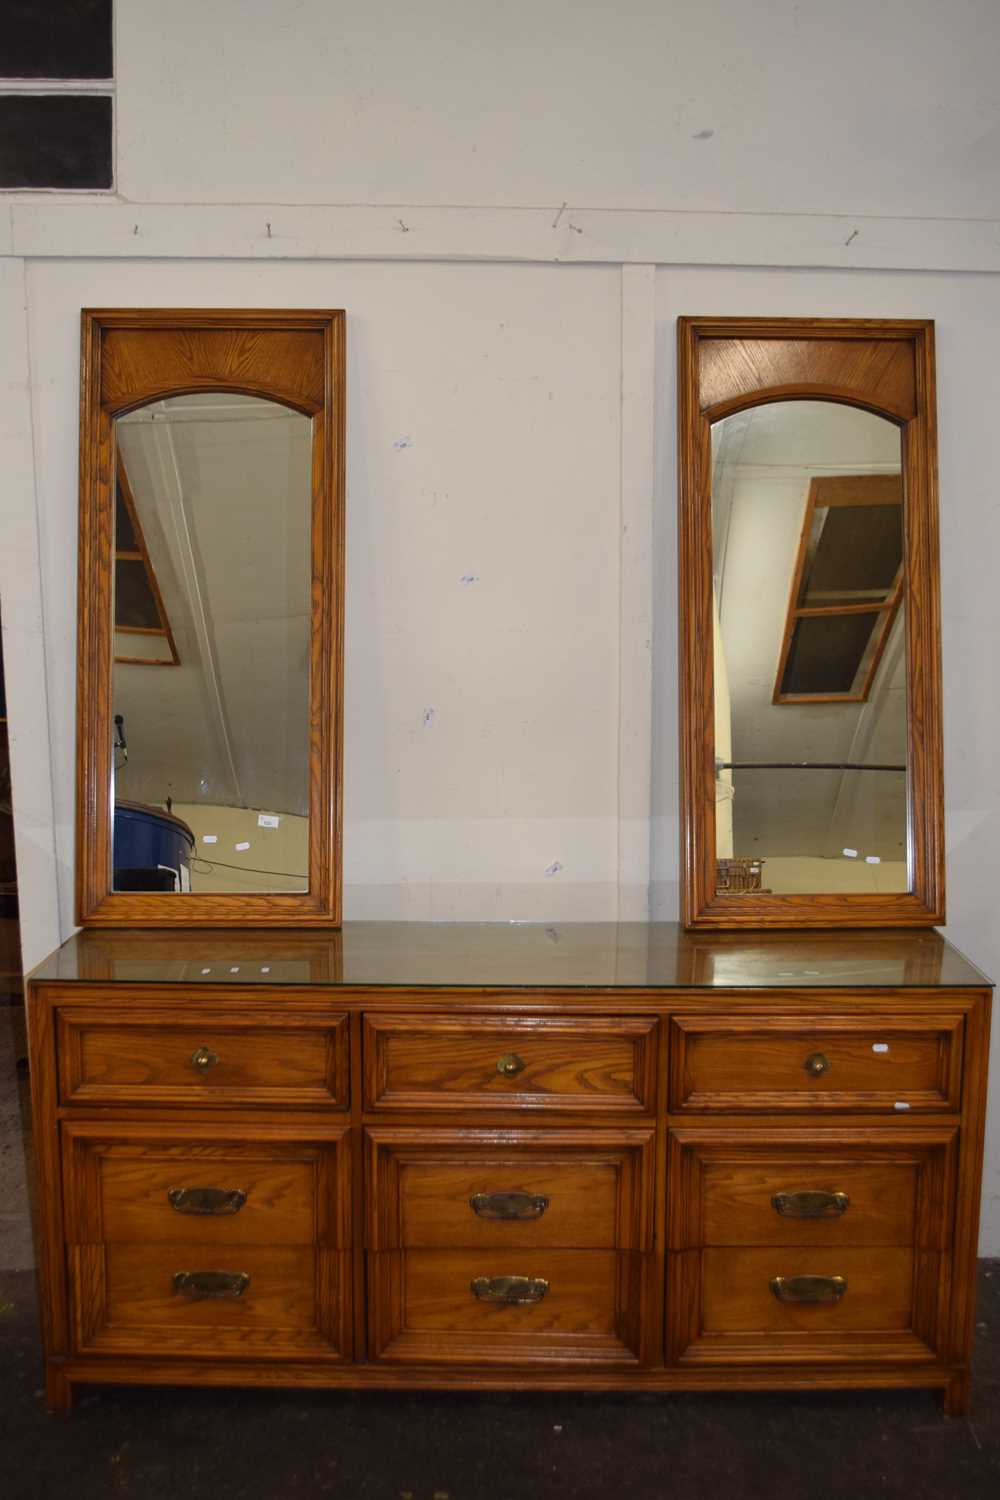 Modern light oak dresser cabinet with double mirrored back and a base with drawers, 168cm wide